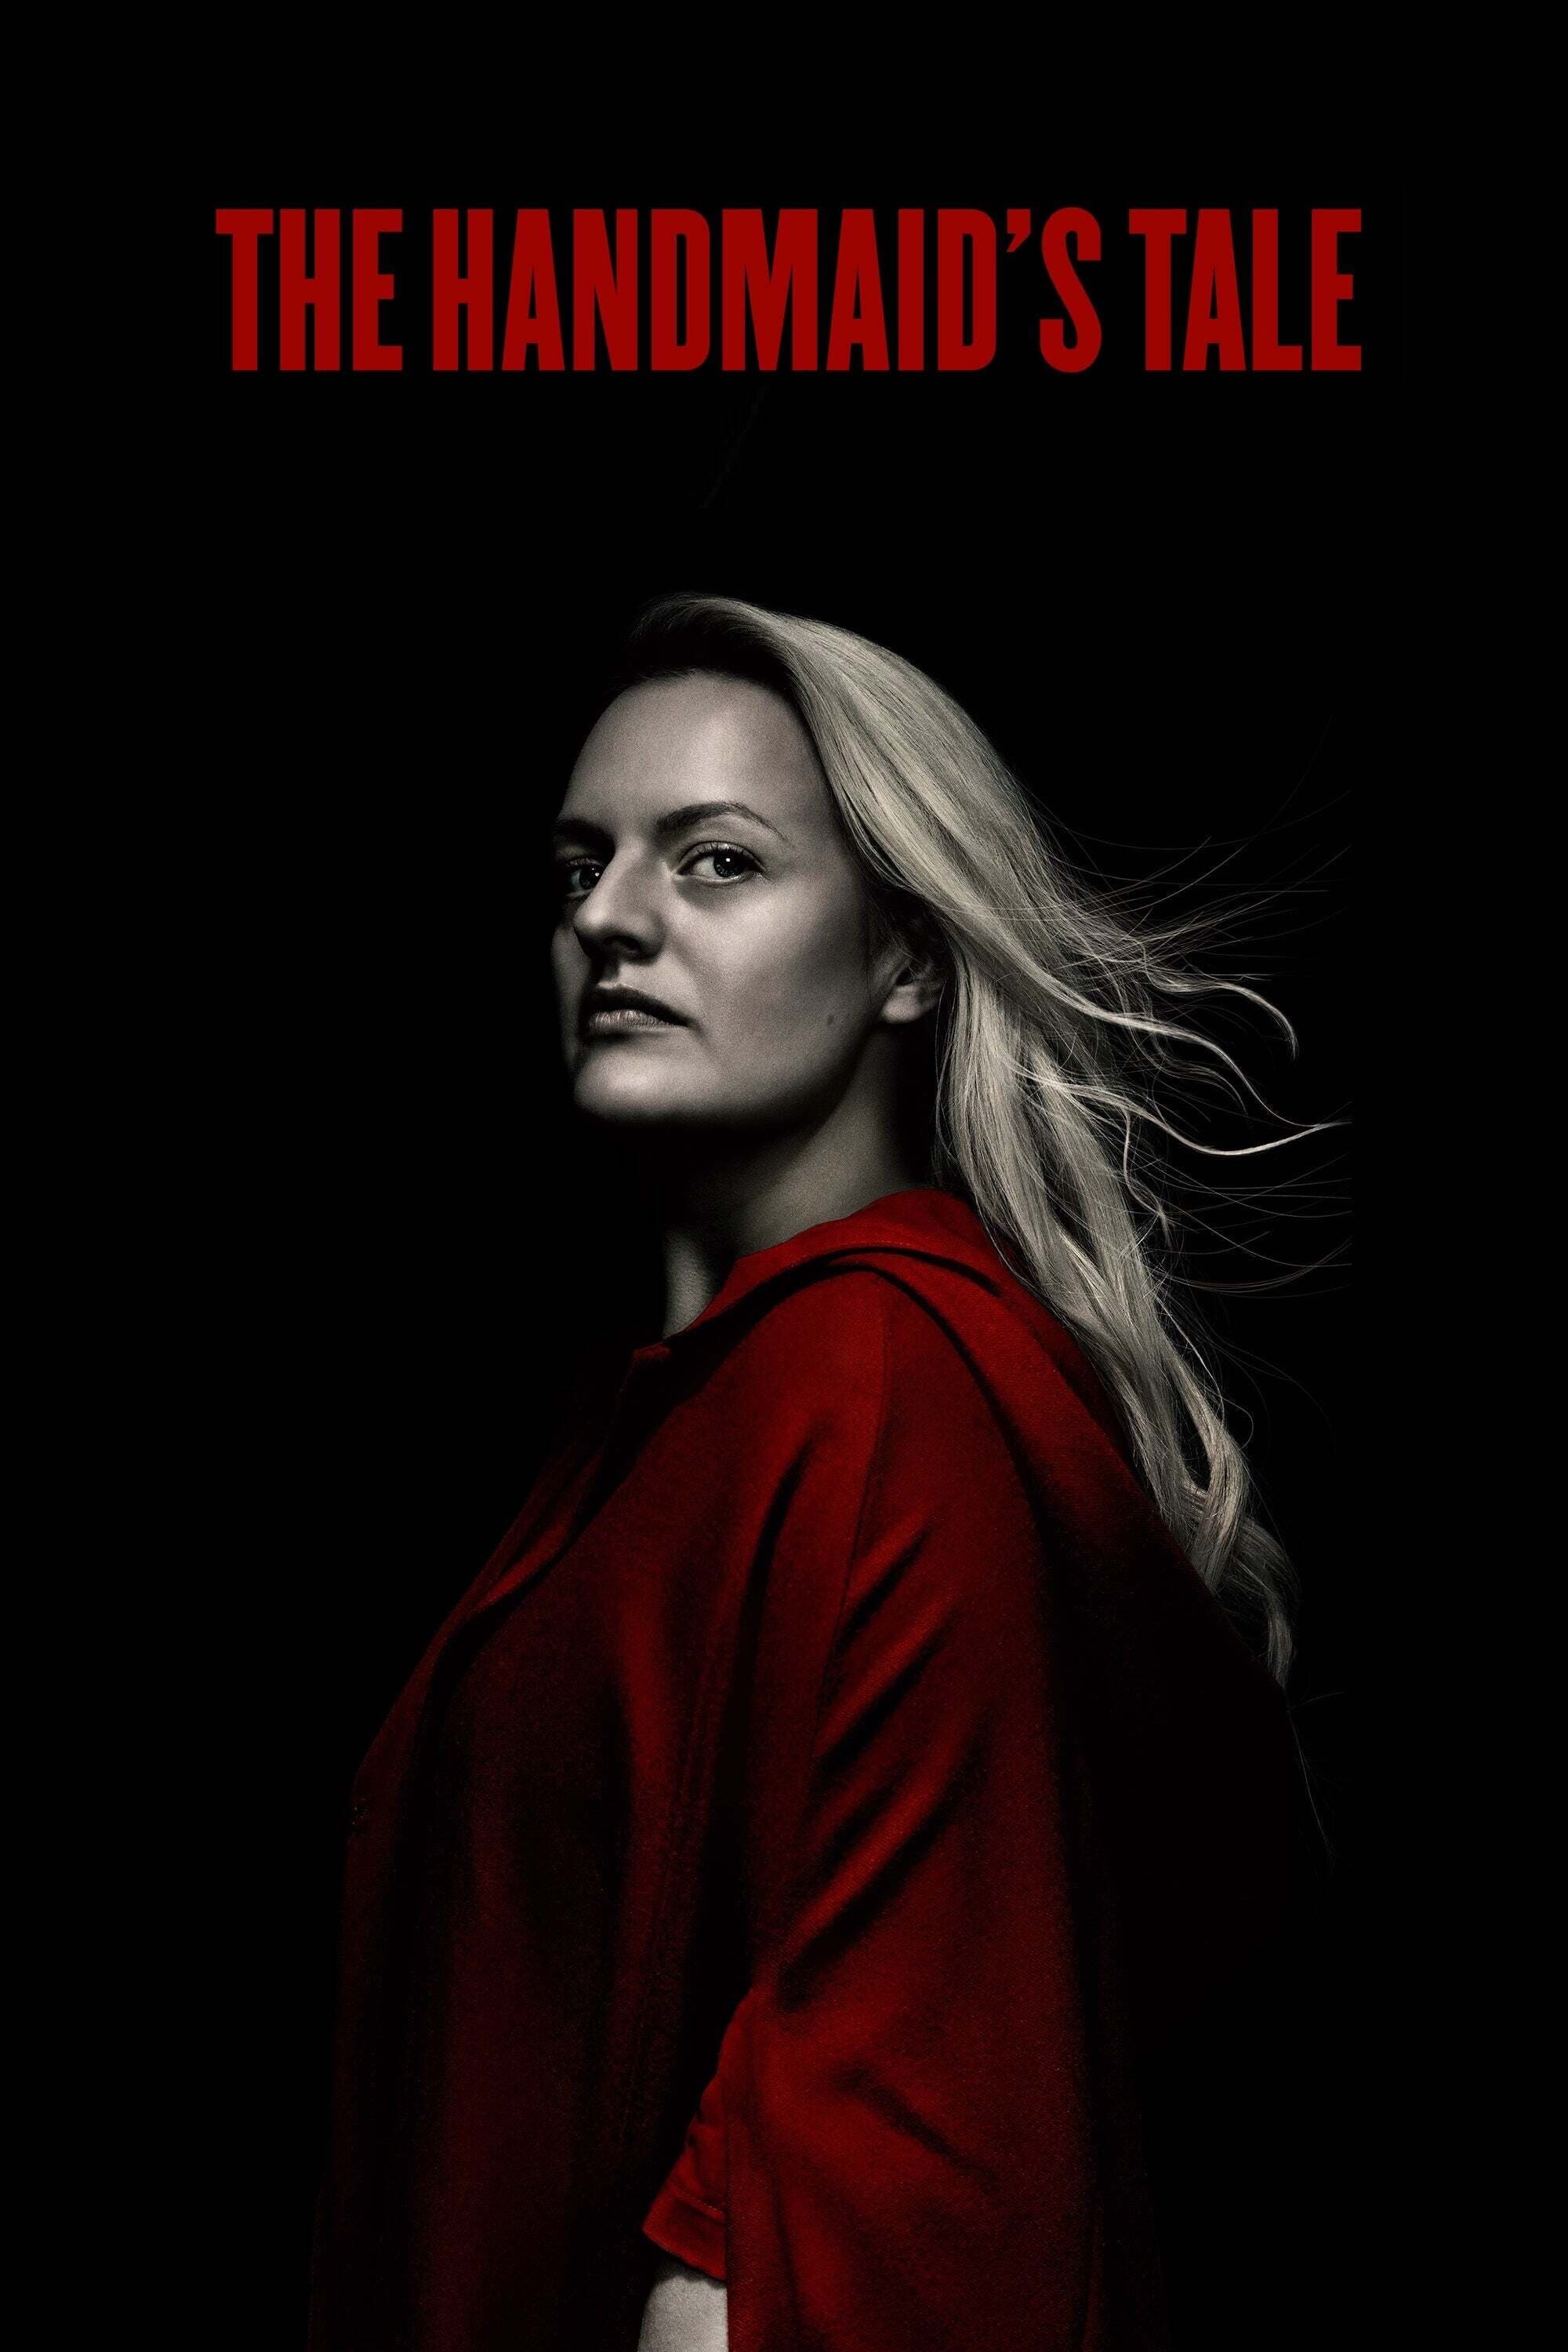 The Handmaid's Tale: Set in a dystopian future, a woman is forced to live as a concubine under a fundamentalist theocratic dictatorship. 2000x3000 HD Wallpaper.